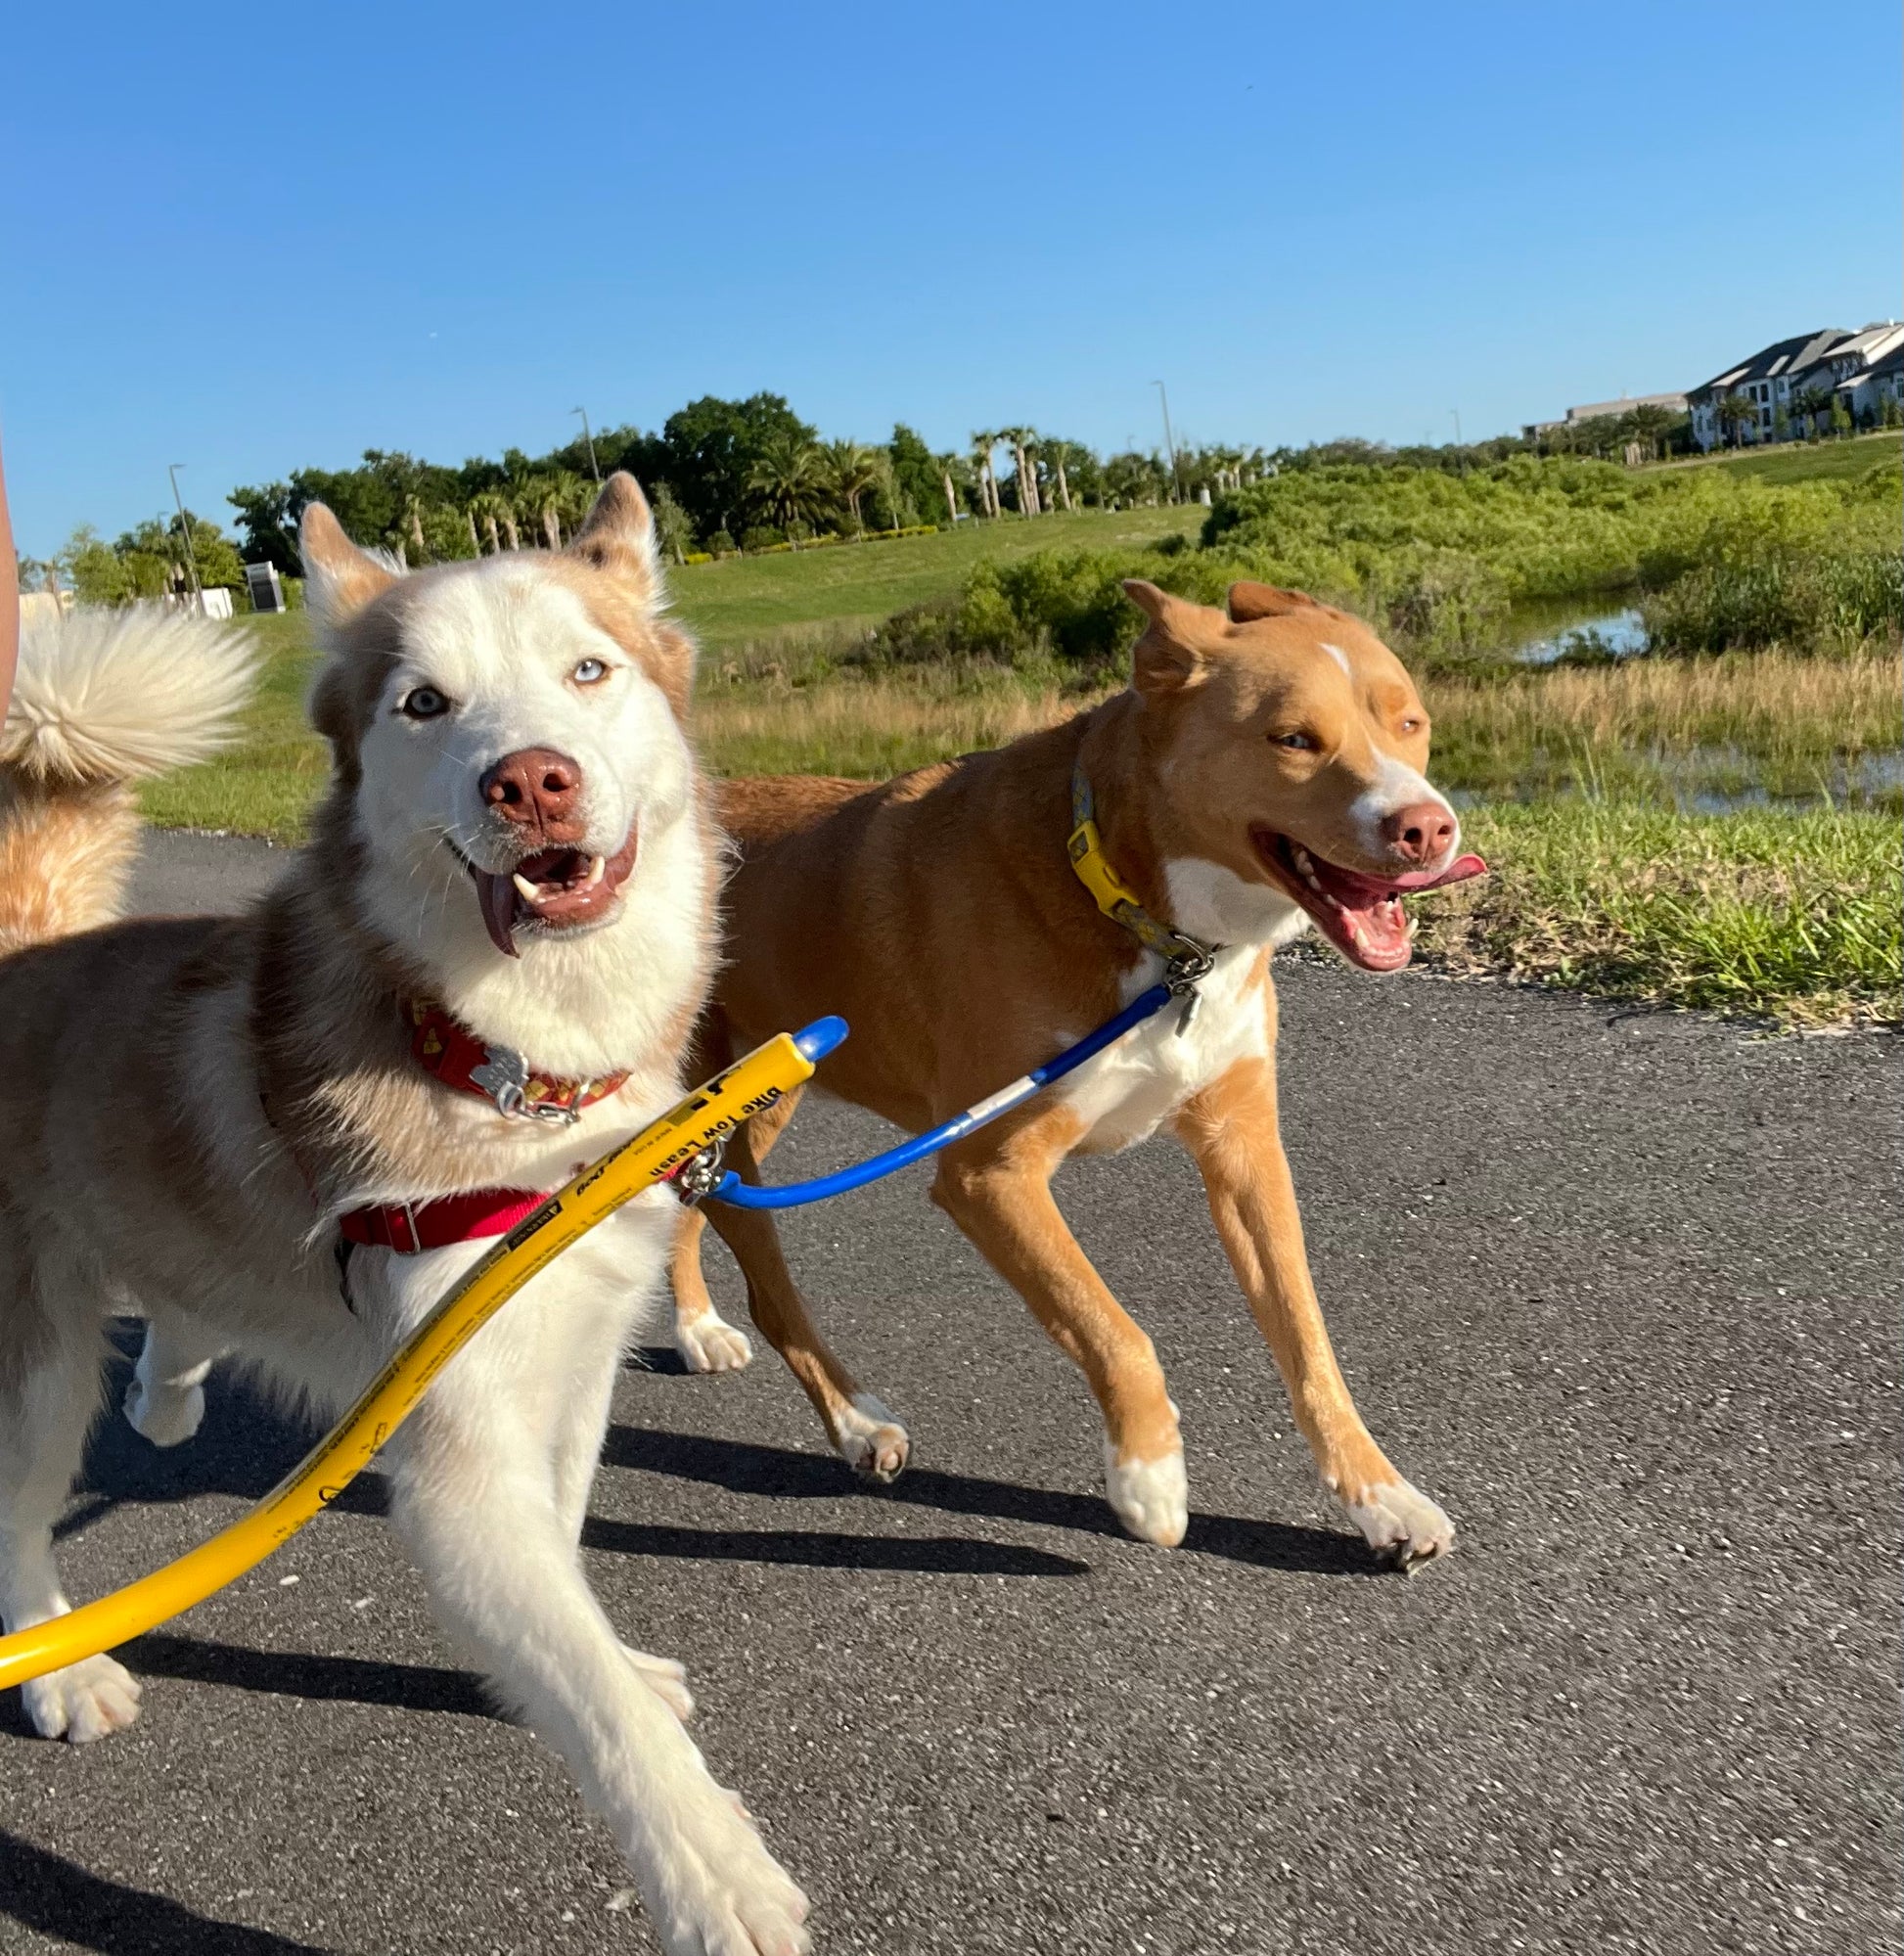  a brown husky is attached to a yellow Bike Tow Leash® attached to a bike off screen, a brown husky toller mix is attached via the BTL dog coupler. Both dogs are mid stride with the husky looking at the camera. Theres fields, water, and trees in the background.